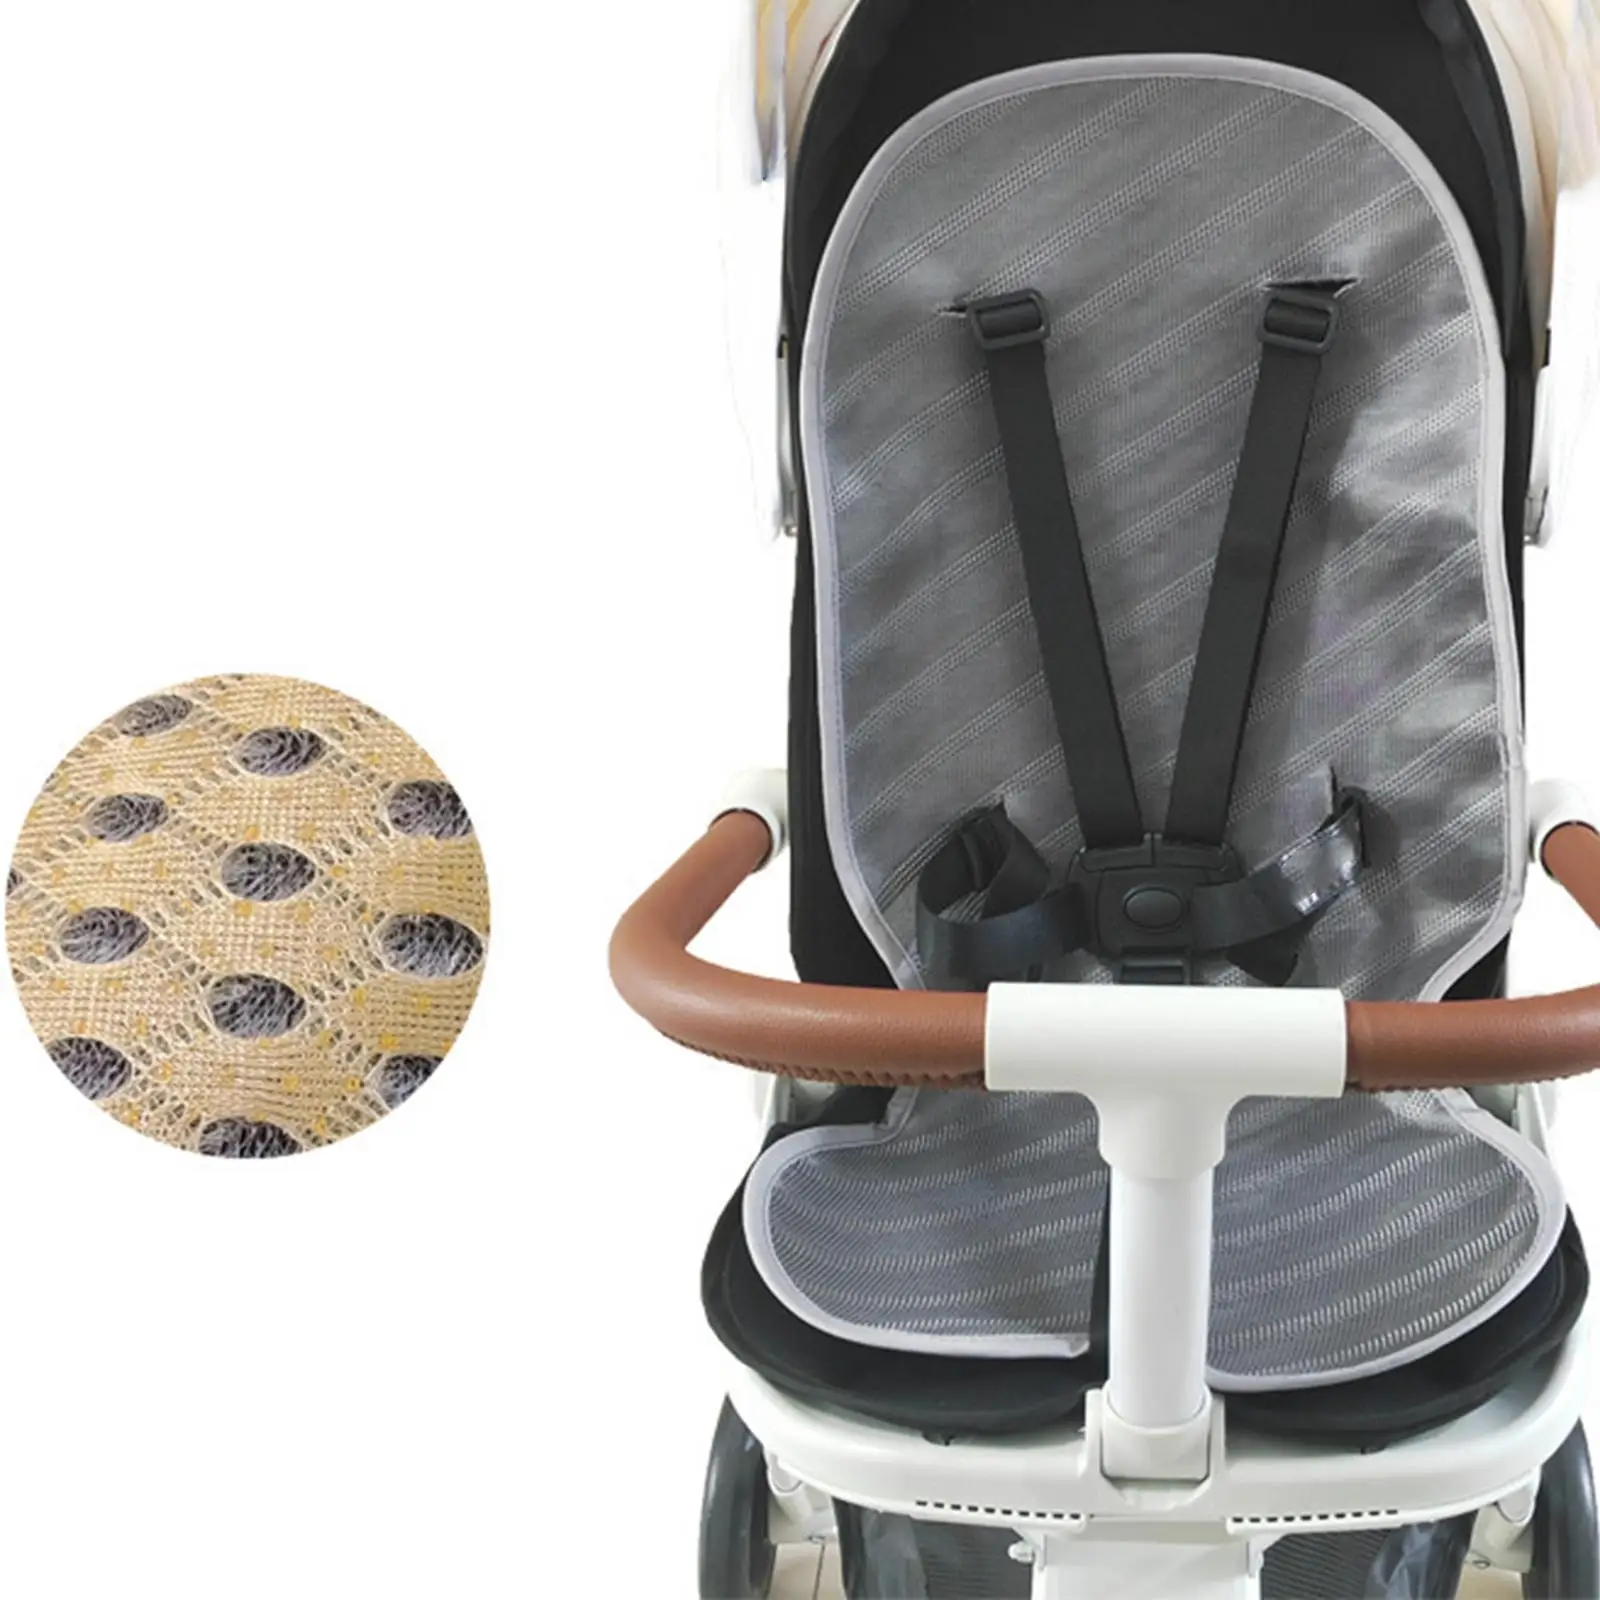 Summer Cooling Seat Pad Strollers Cool Seat Pad Universal Baby Strollers Cushion Mat for Trolley Pram Pushchair Strollers